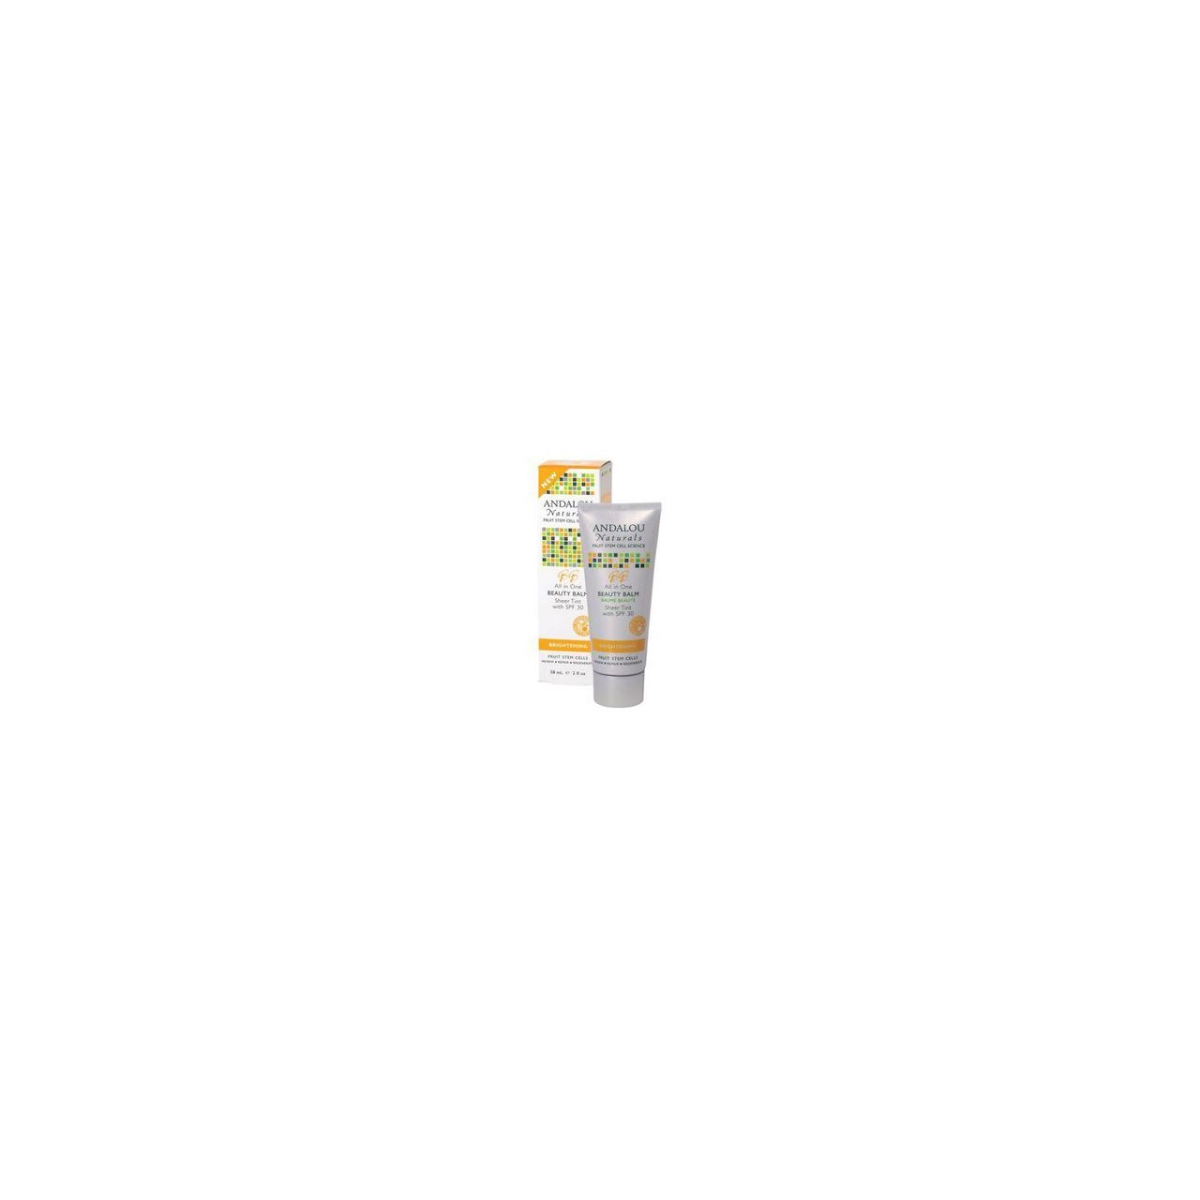 Picture of Andalou Naturals HG1162601 2 oz Beauty Balm Sheer Tint with SPF 30 Brightening